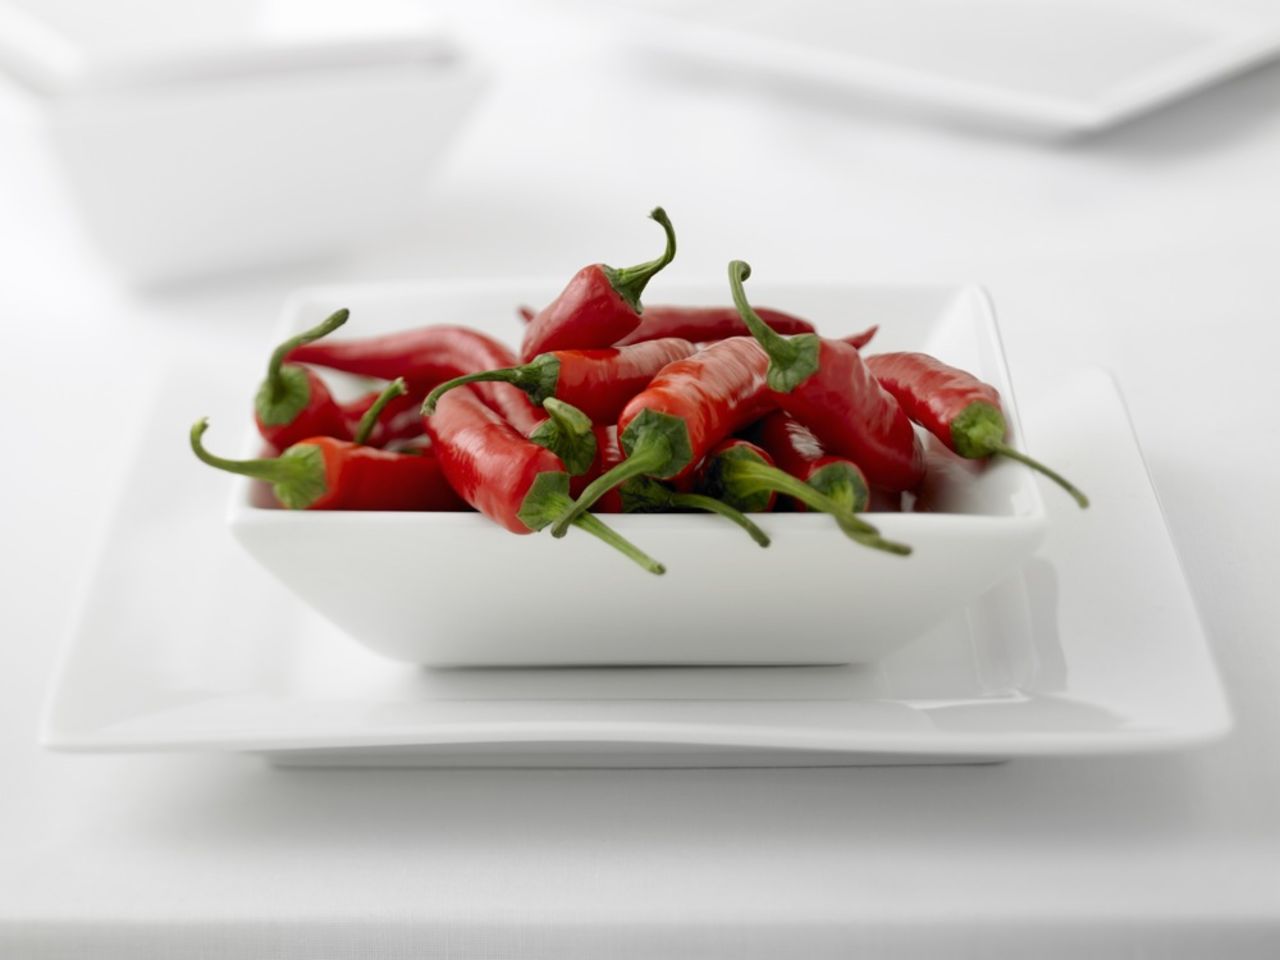 The heat in chilis is the product of capsaicin, which can help burn 50 to 100 calories following a meal.